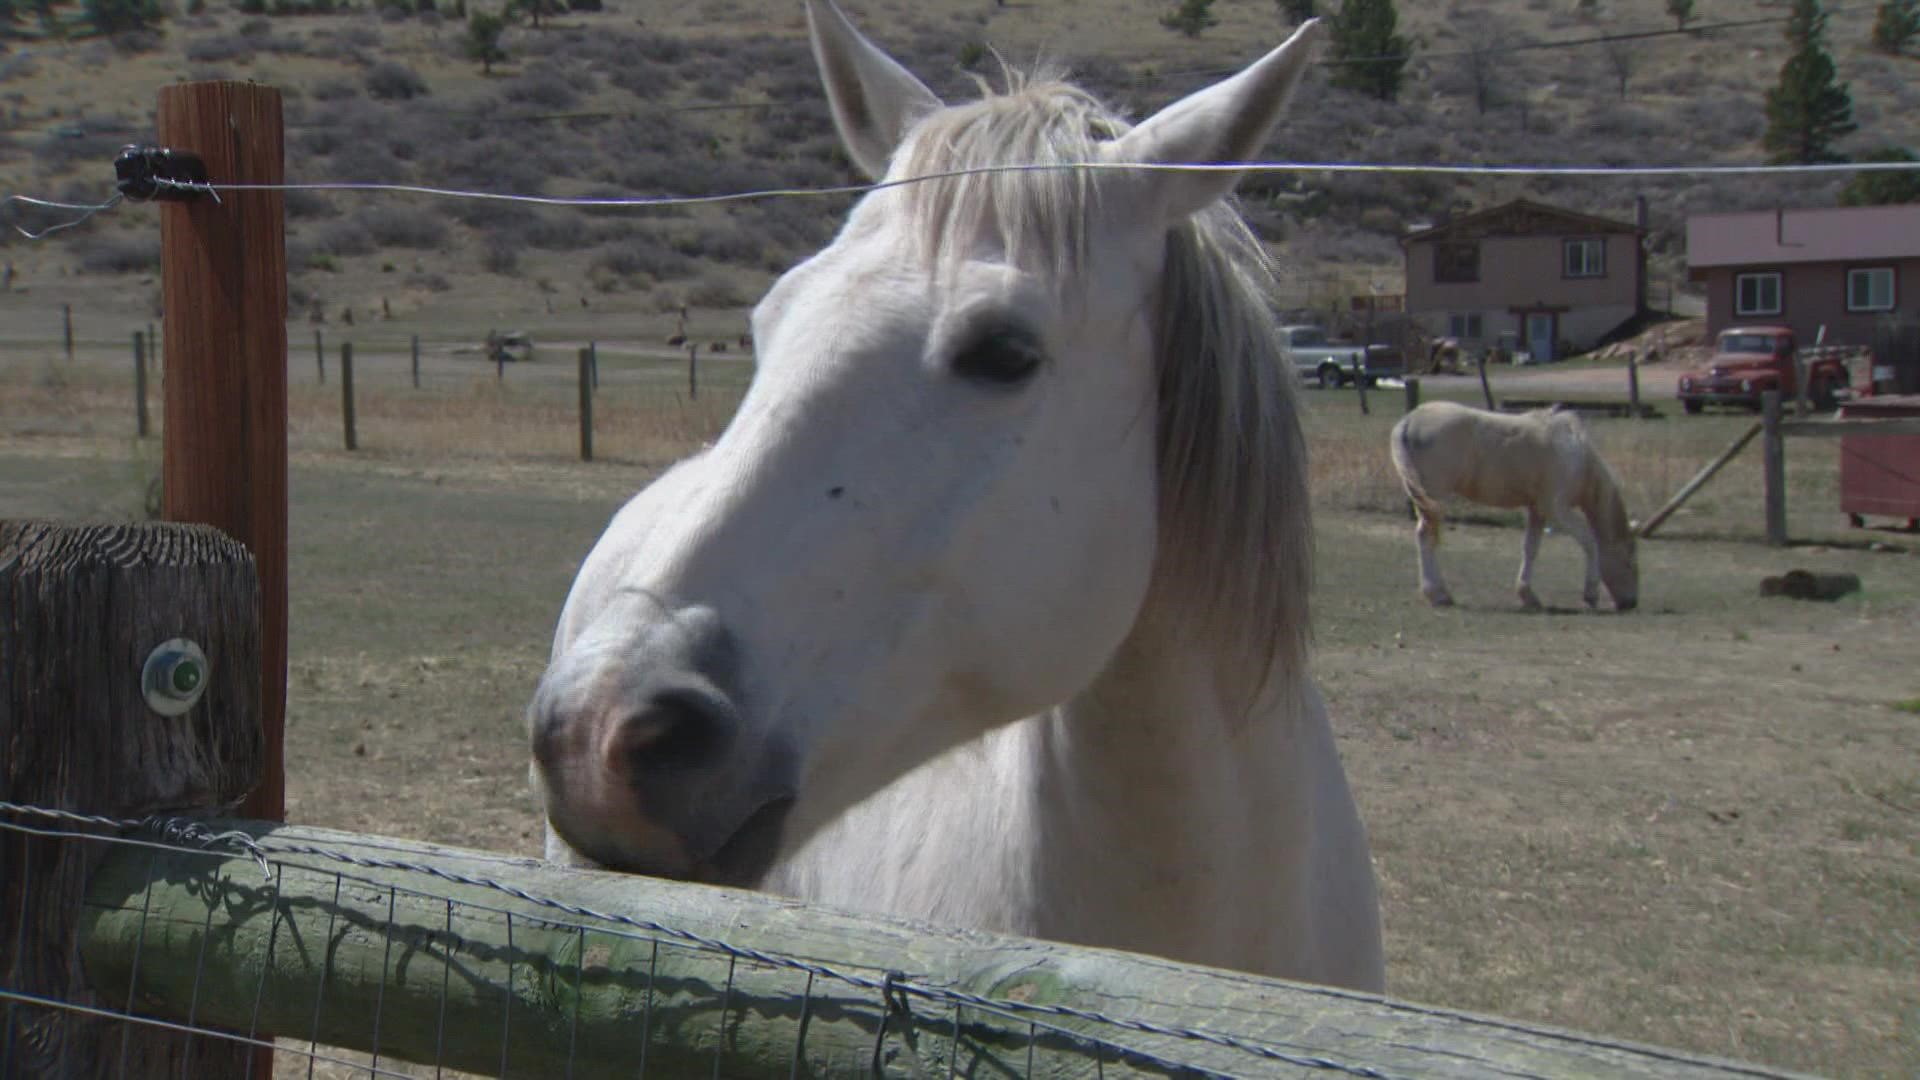 Nearly 100 wild horses have now died at a facility in canon city. The bureau of land management thinks an equine influenza virus could be the cause.